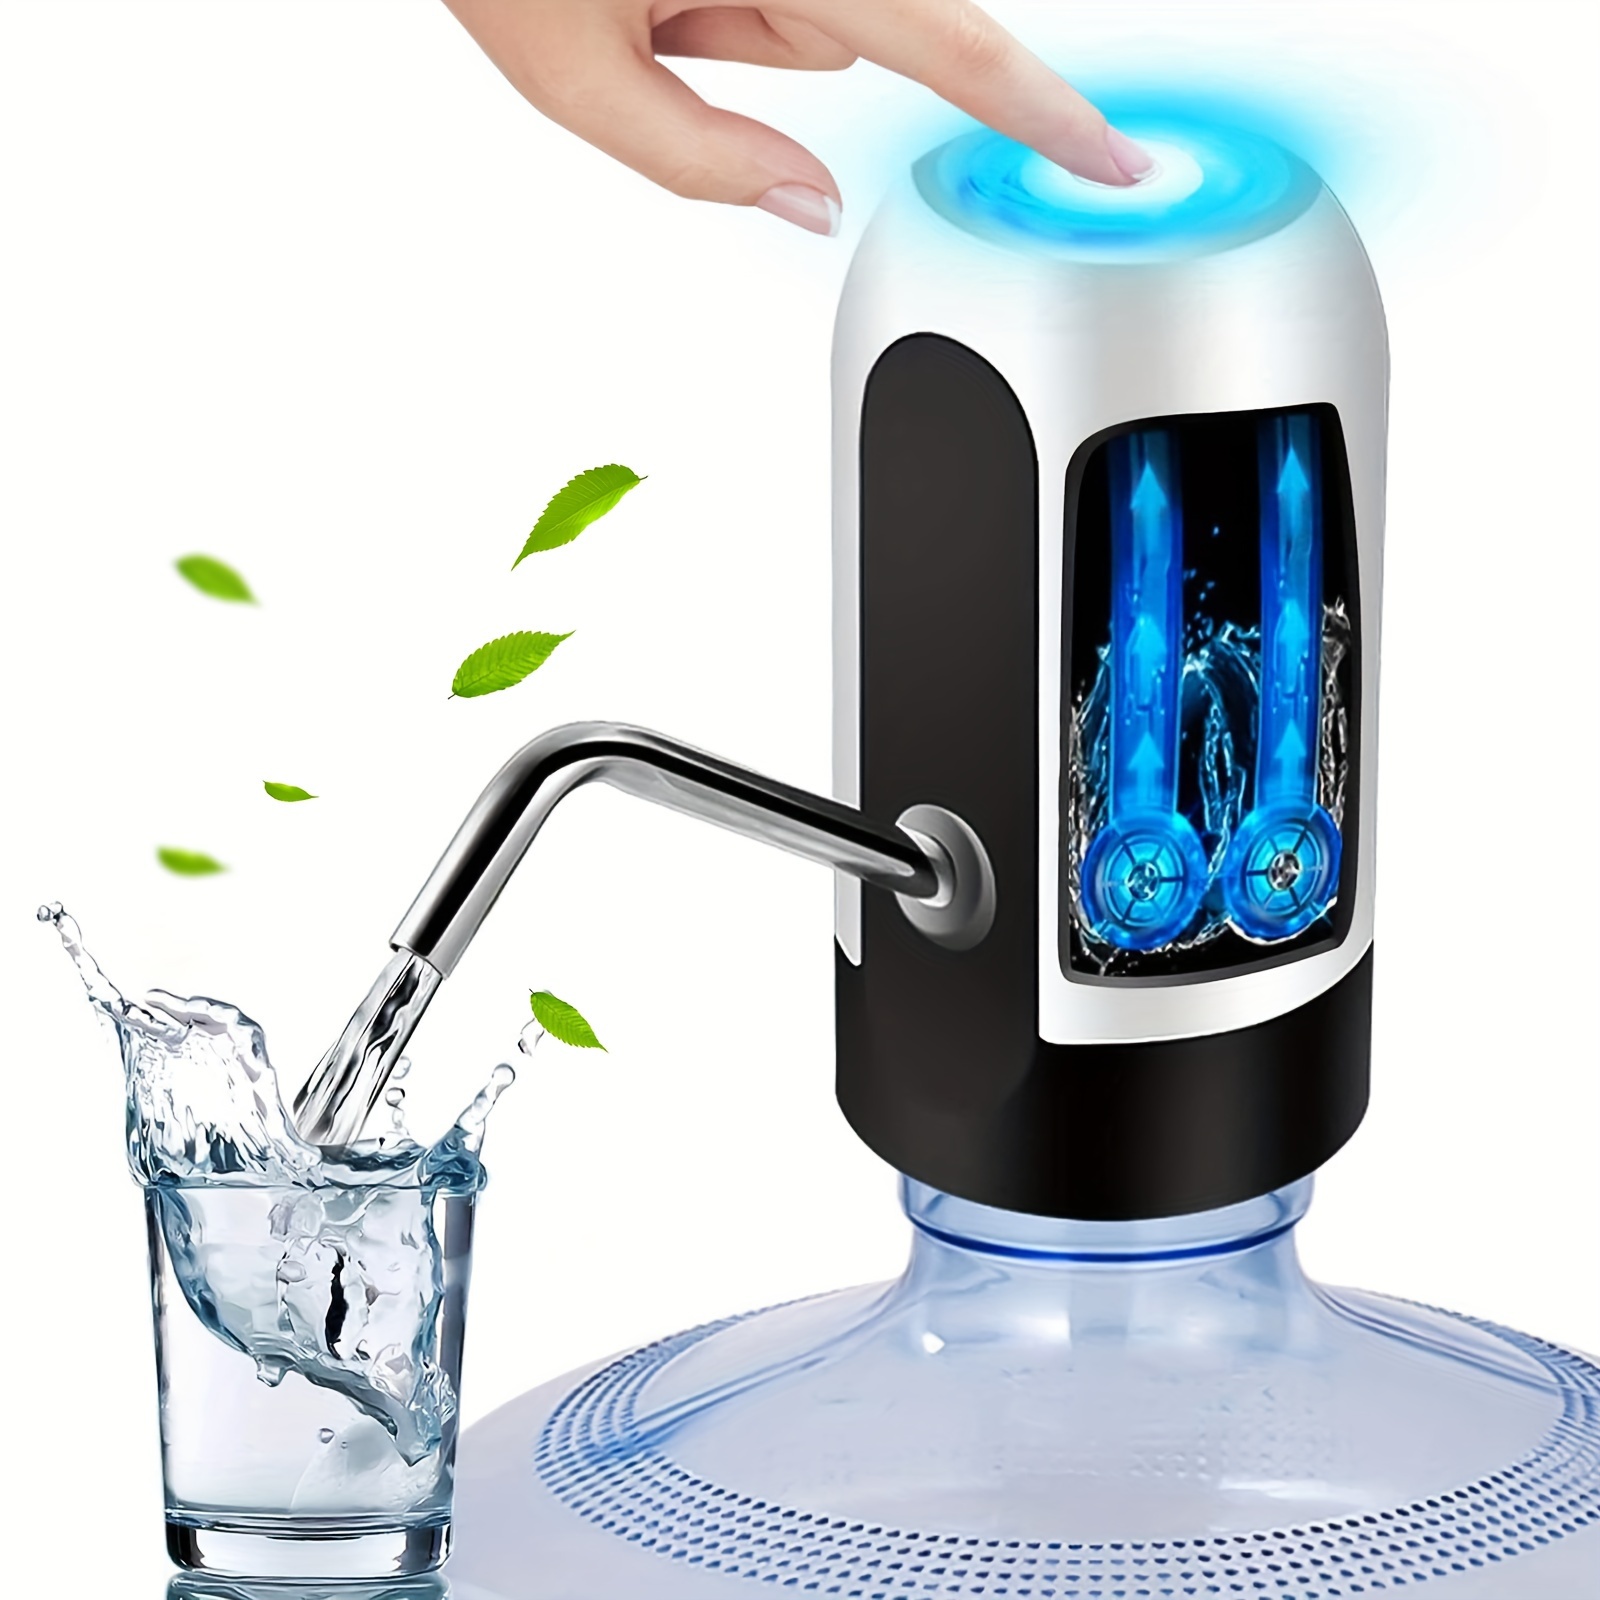 Water Dispenser 5-Gallon , Foldable Automatic Electric Drinking Water Pump  USB Rechargeable Water Bottle Pump for Home Kitchen Office Outdoor Use 